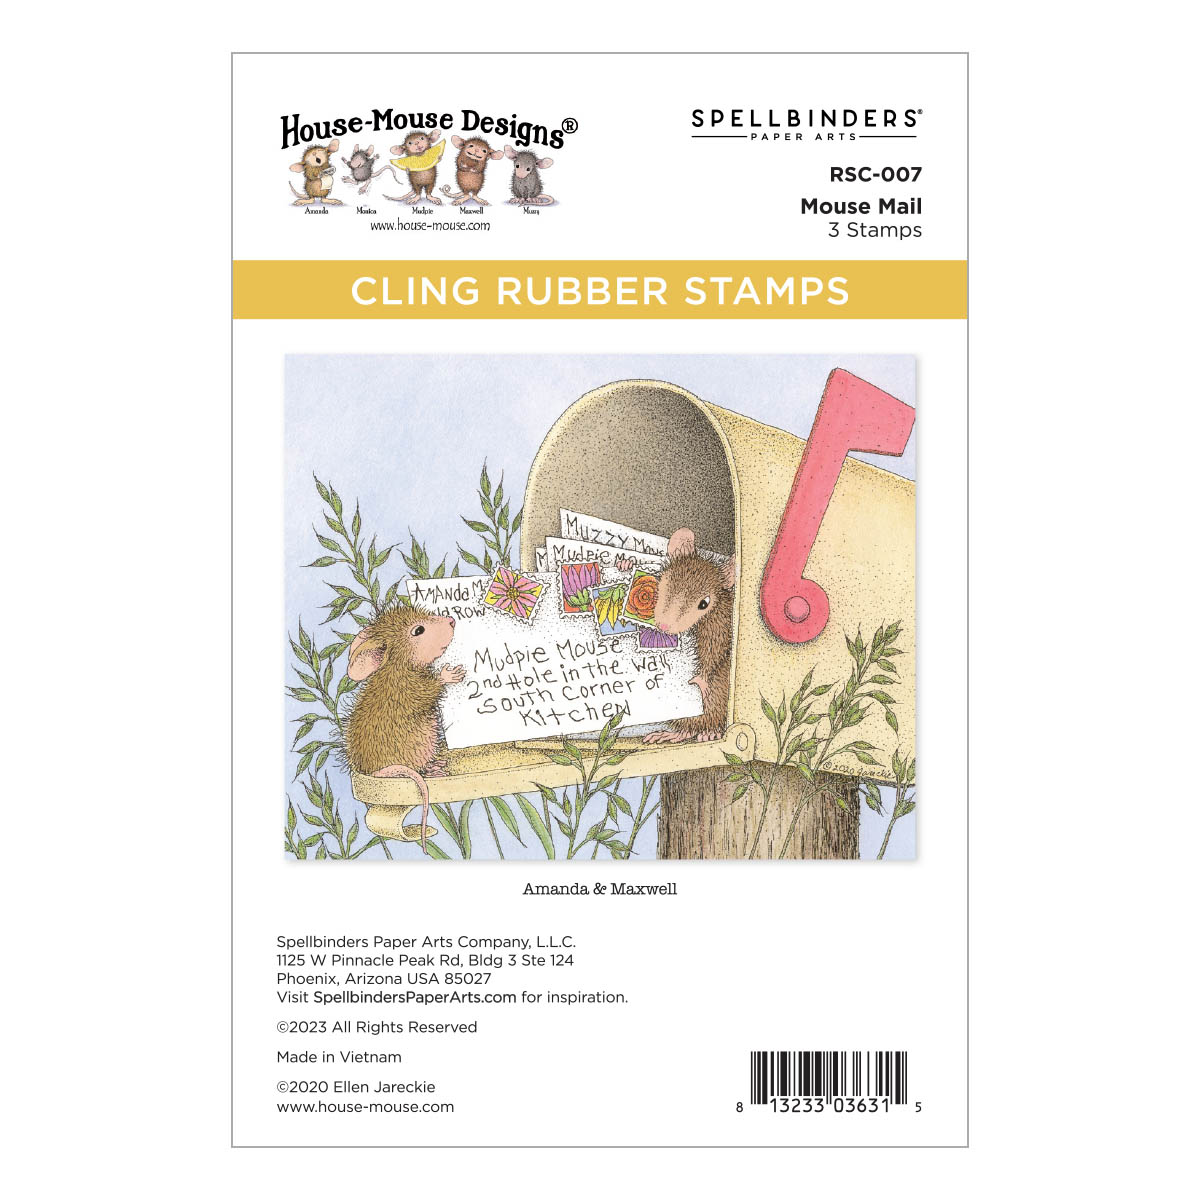 Spellbinders House Mouse Stamp Mouse Mail